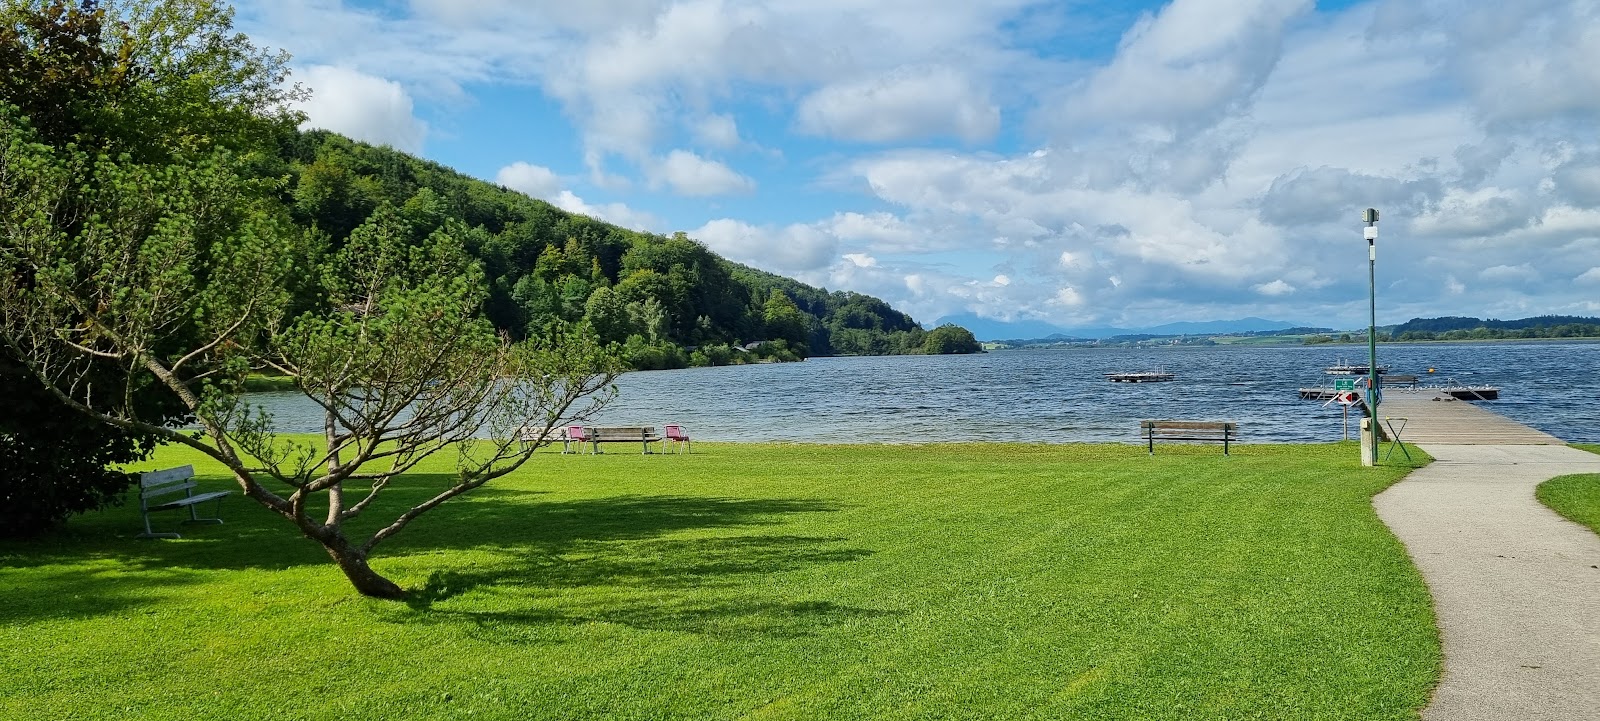 Photo of Wallersee Strand with straight shore